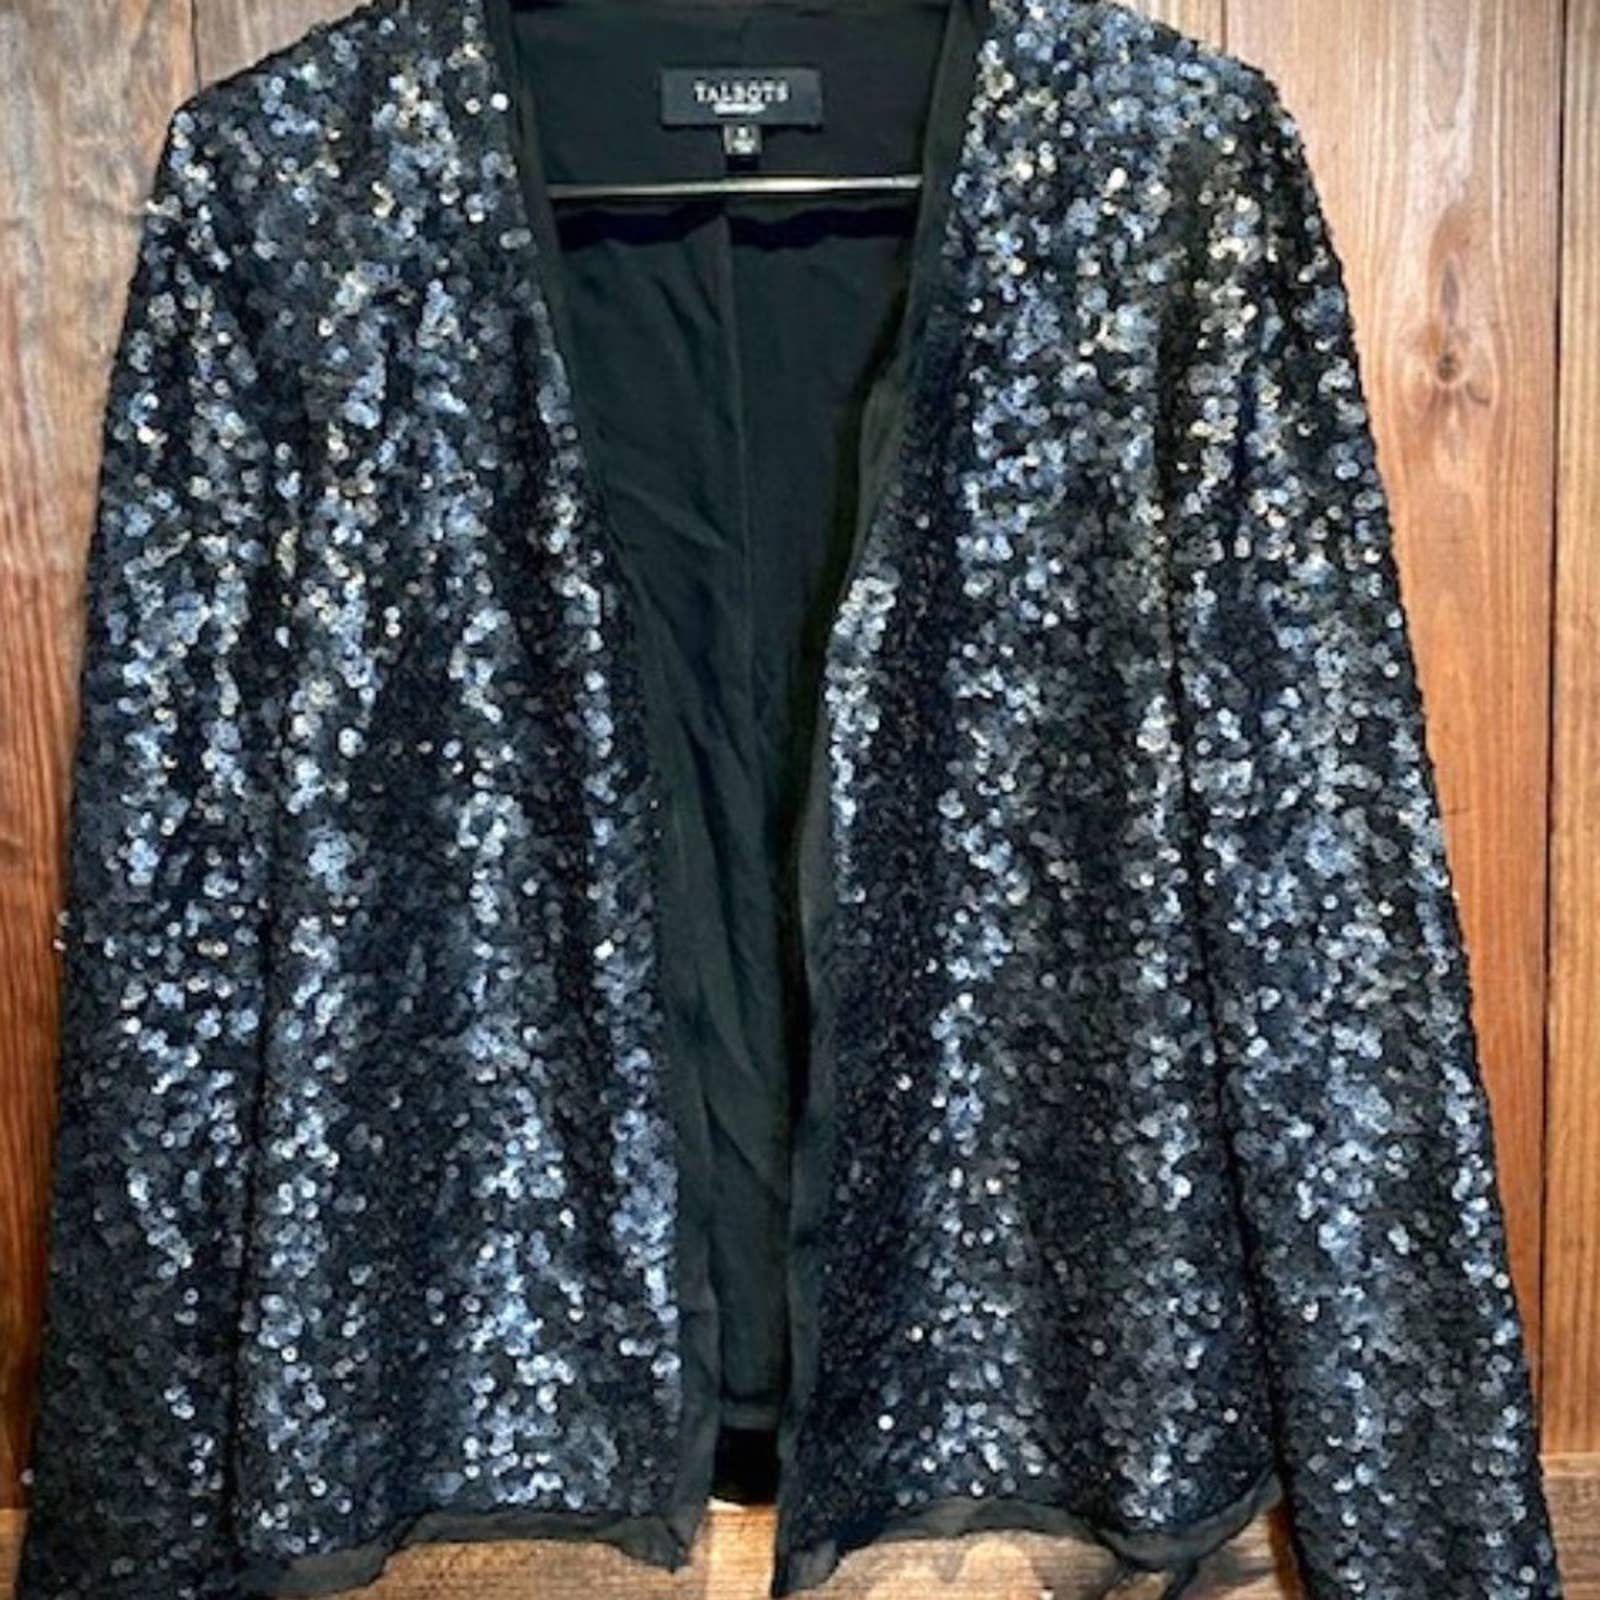 Black Sequin Jacket, Perfect Over Black Dress For Party, Beautiful, (6015) ncDw5mPXm